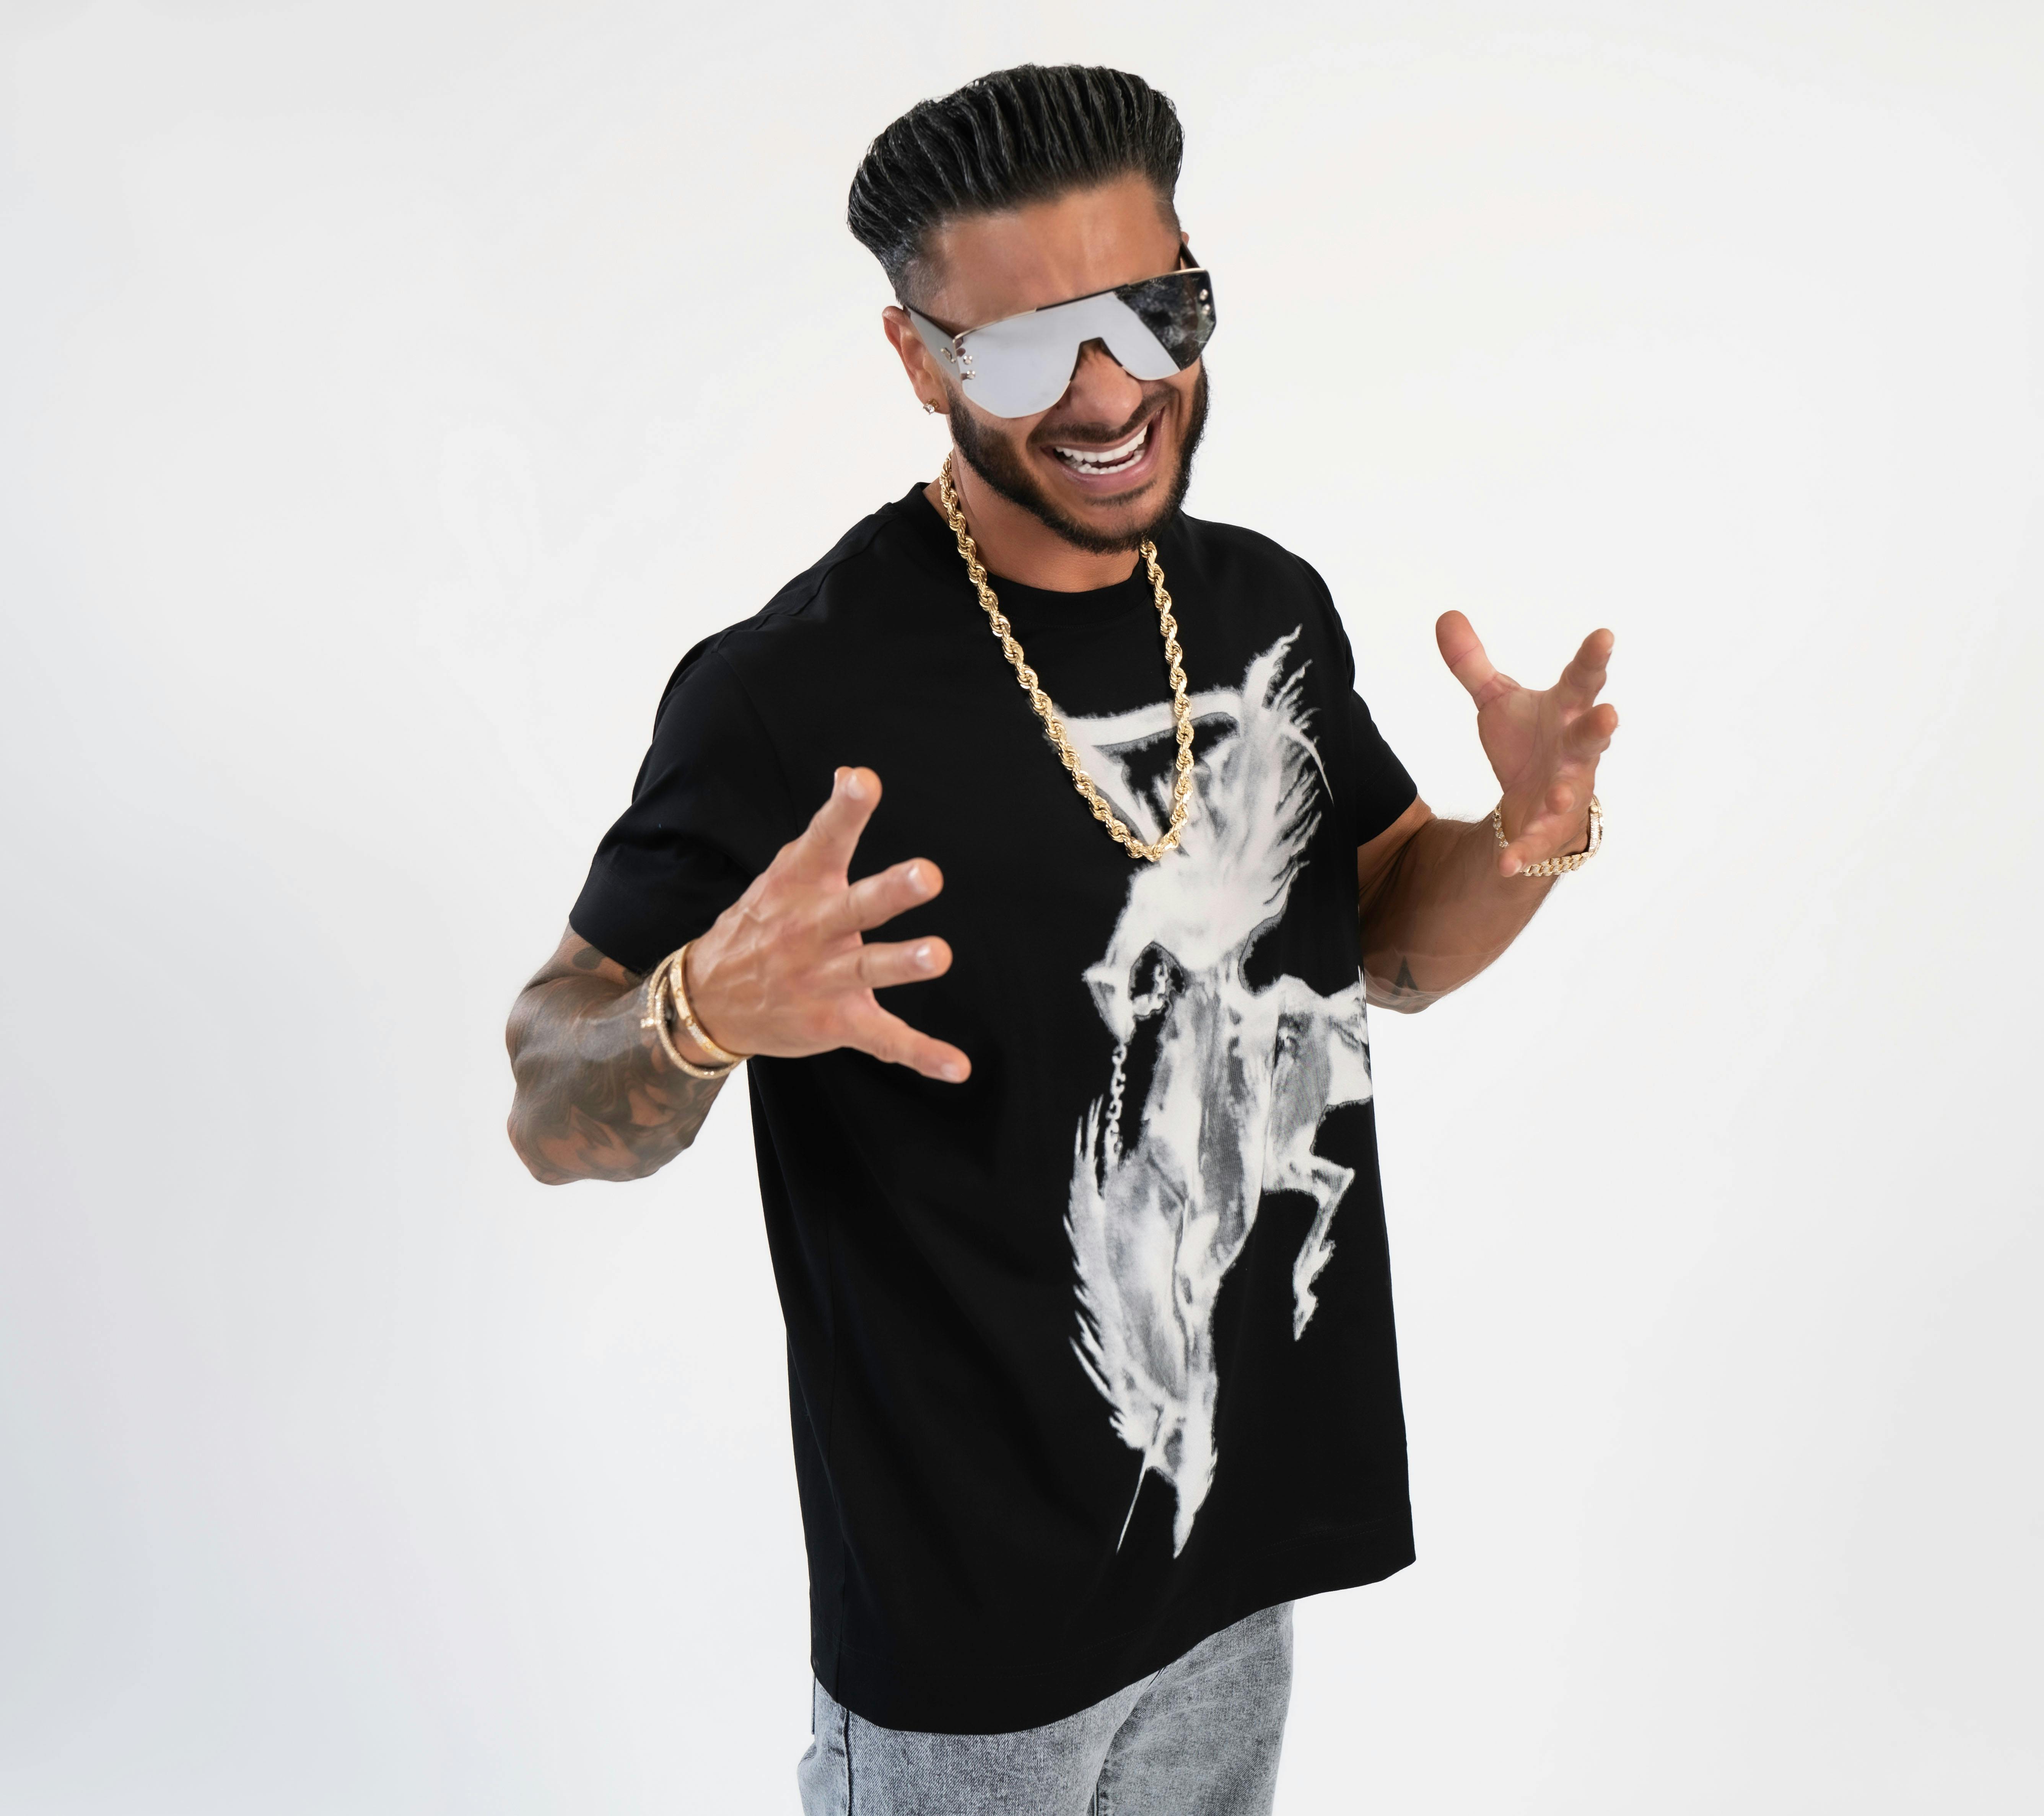 DJ PAULY D BRINGS HIGH-POWERED SHOW BACK TO RIVERS CASINO PITTSBURGH